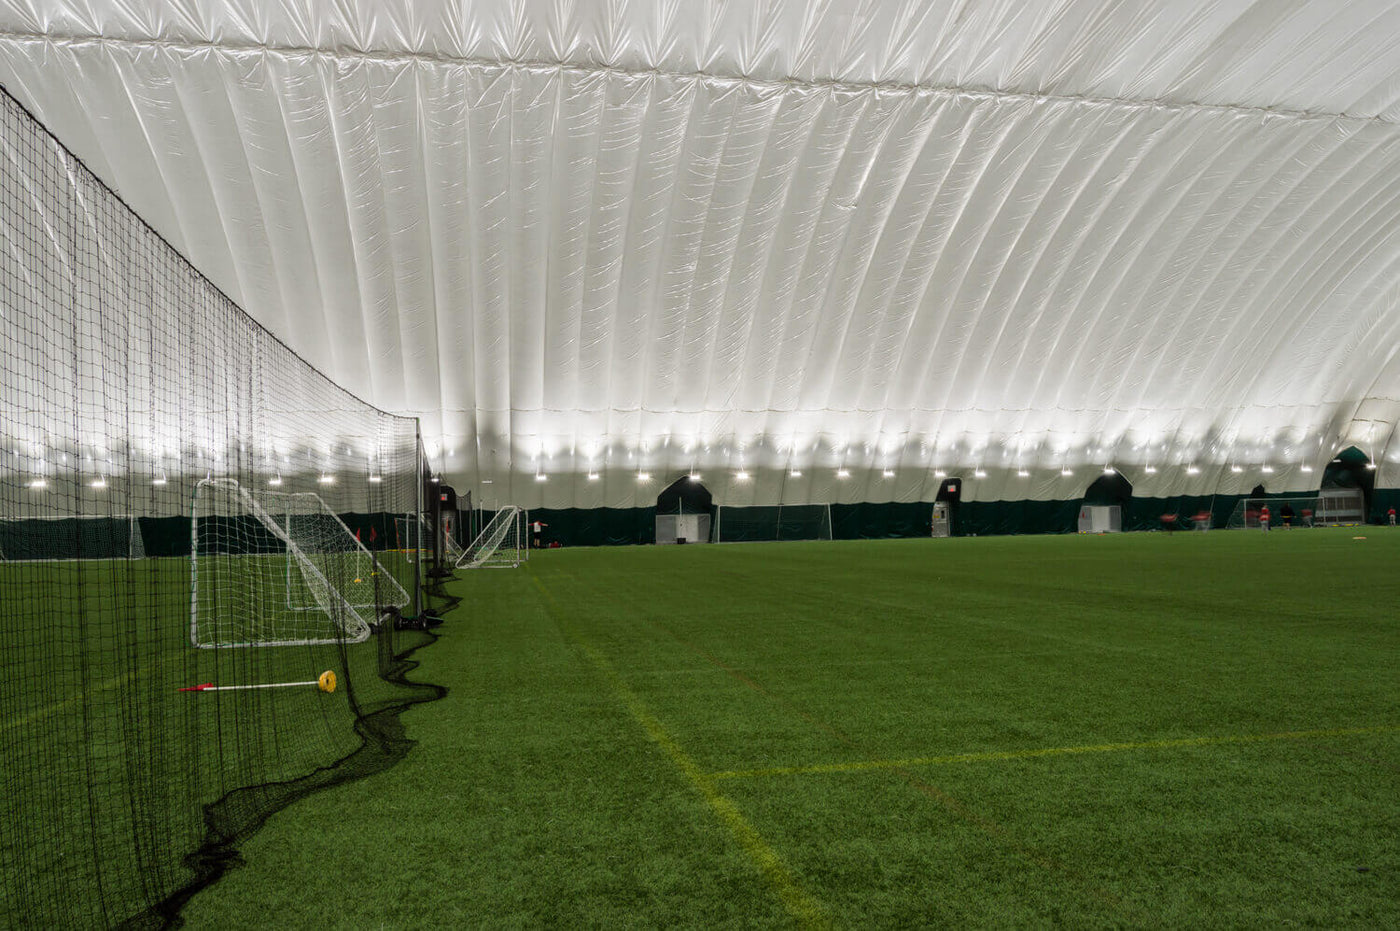 Sparta Sports Dome Lighting | LED Helios Light Fixtures